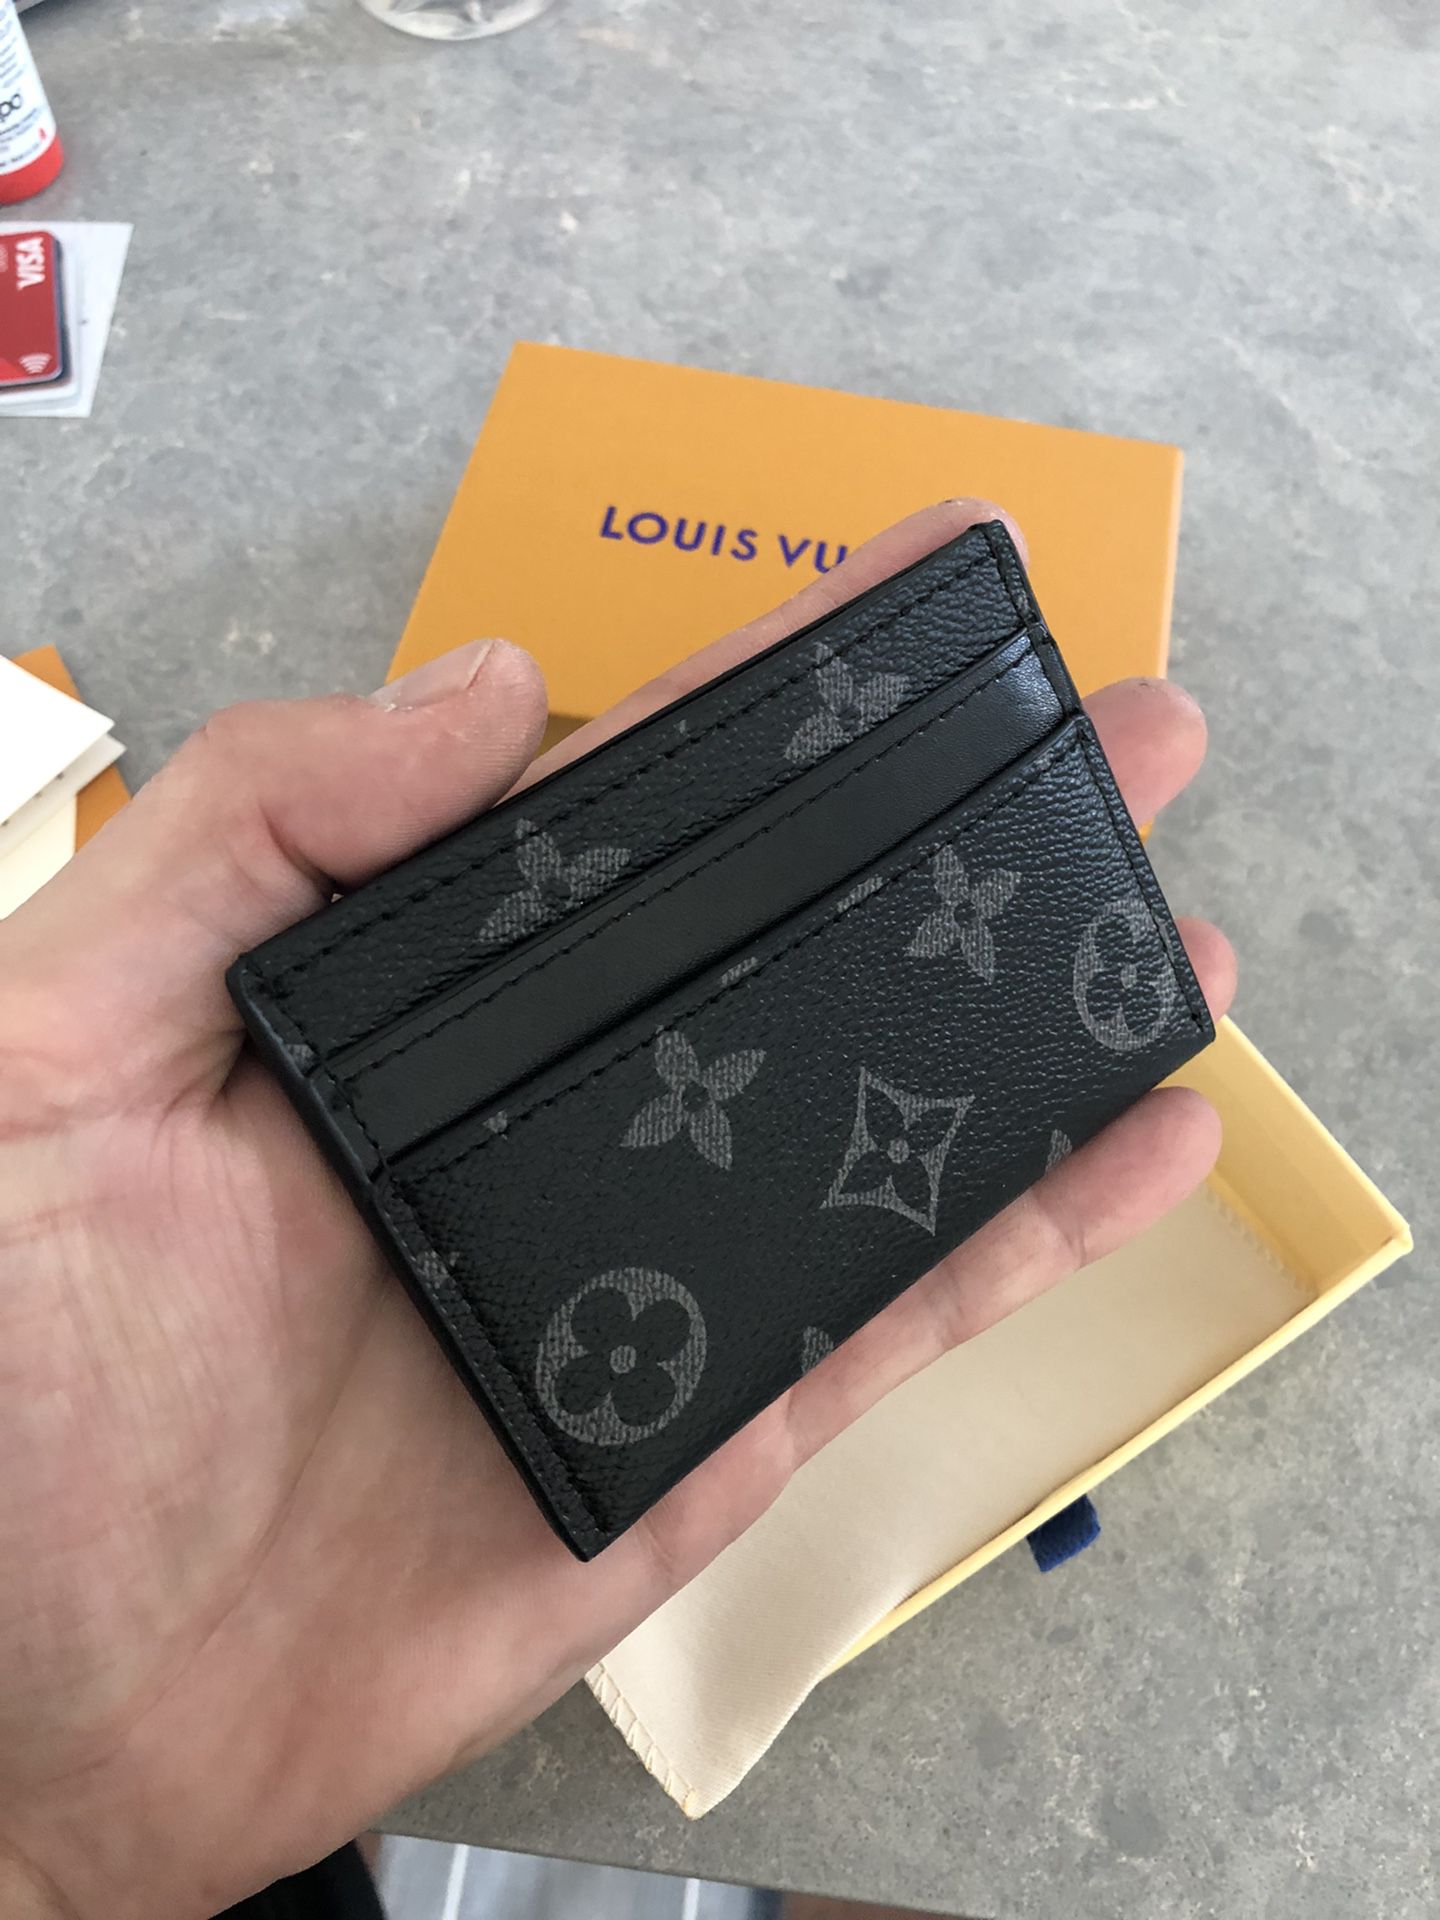 Louis Vuitton Double Card Holder for Sale in Rockaway Beac, NY